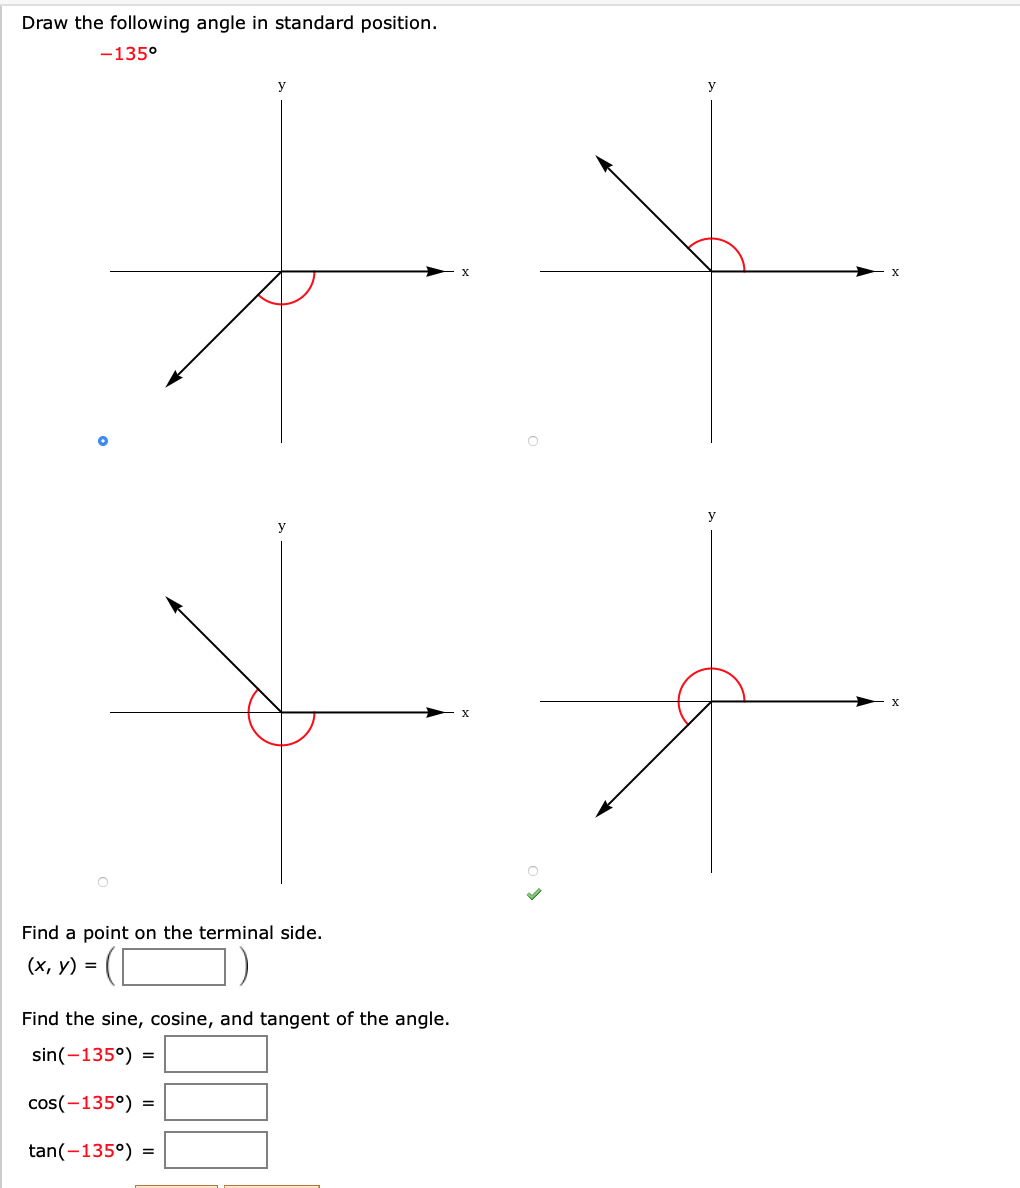 Draw the following angle in standard position
-135°
y
y
y
У
Find a point on the terminal side.
(х, у) %3D
Find the sine, cosine, and tangent of the angle.
sin(-135
=
cos(-135)
=
tan(-1350)
